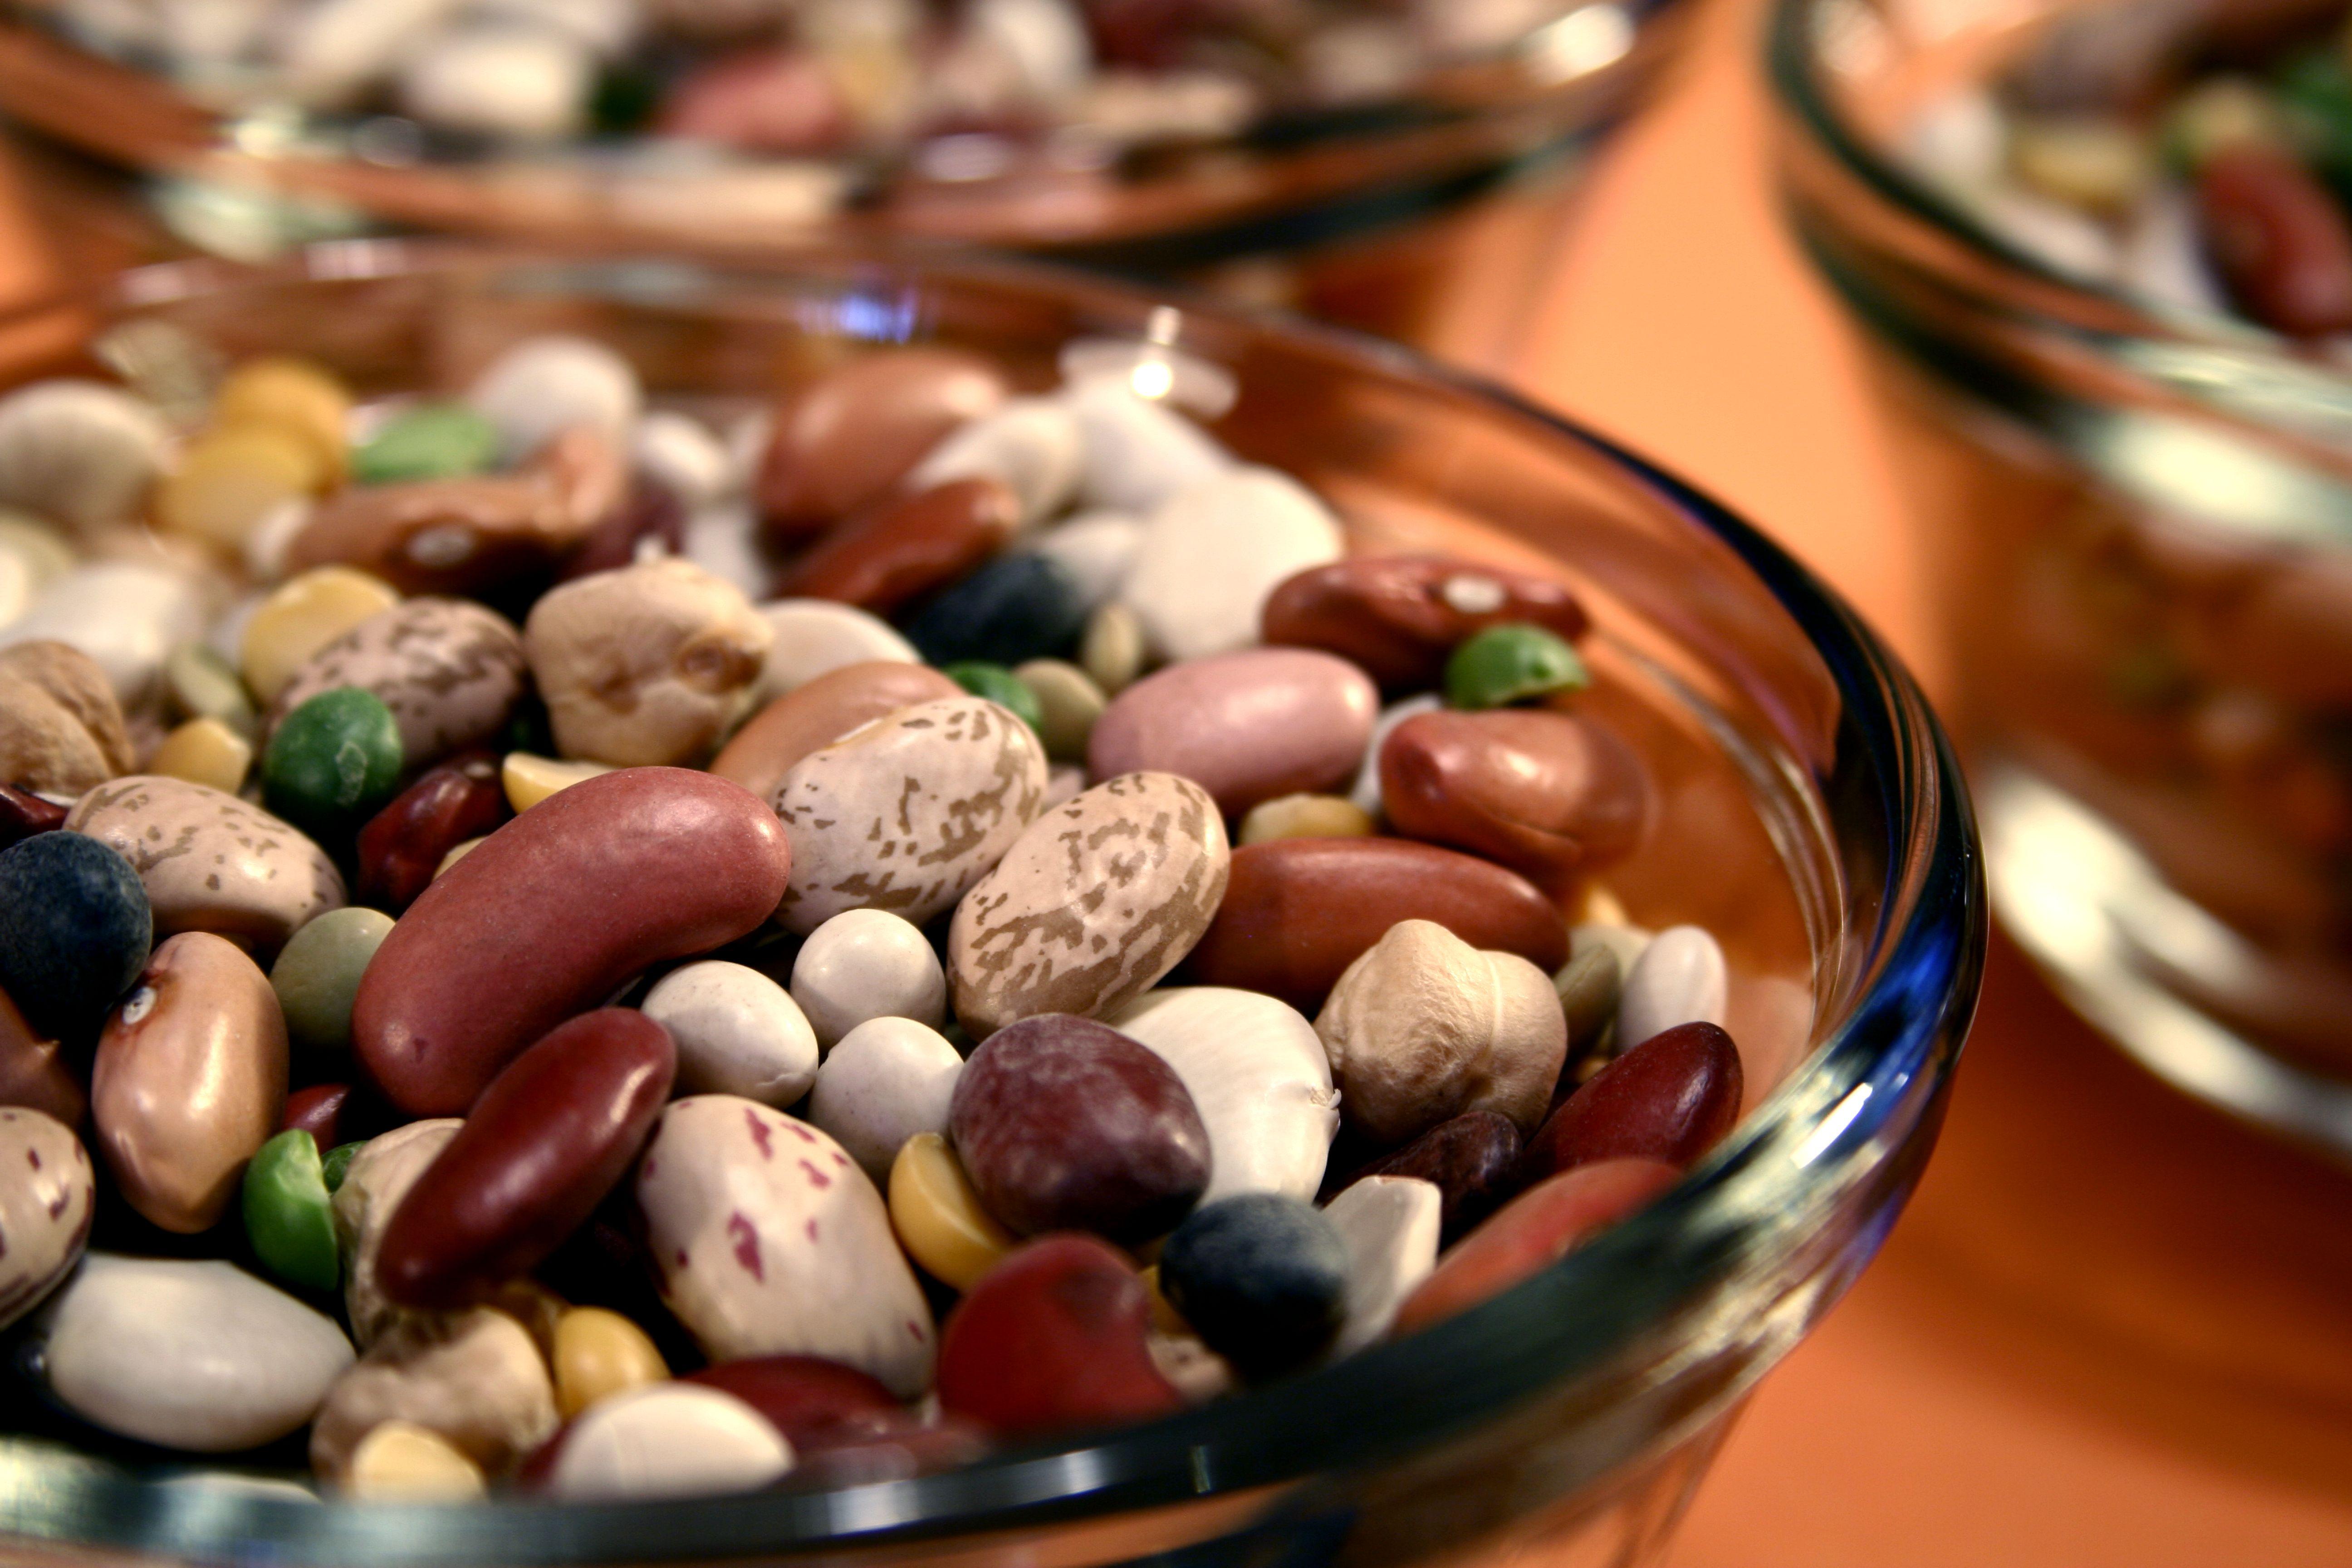 A small bowl with a variety of dried beans.